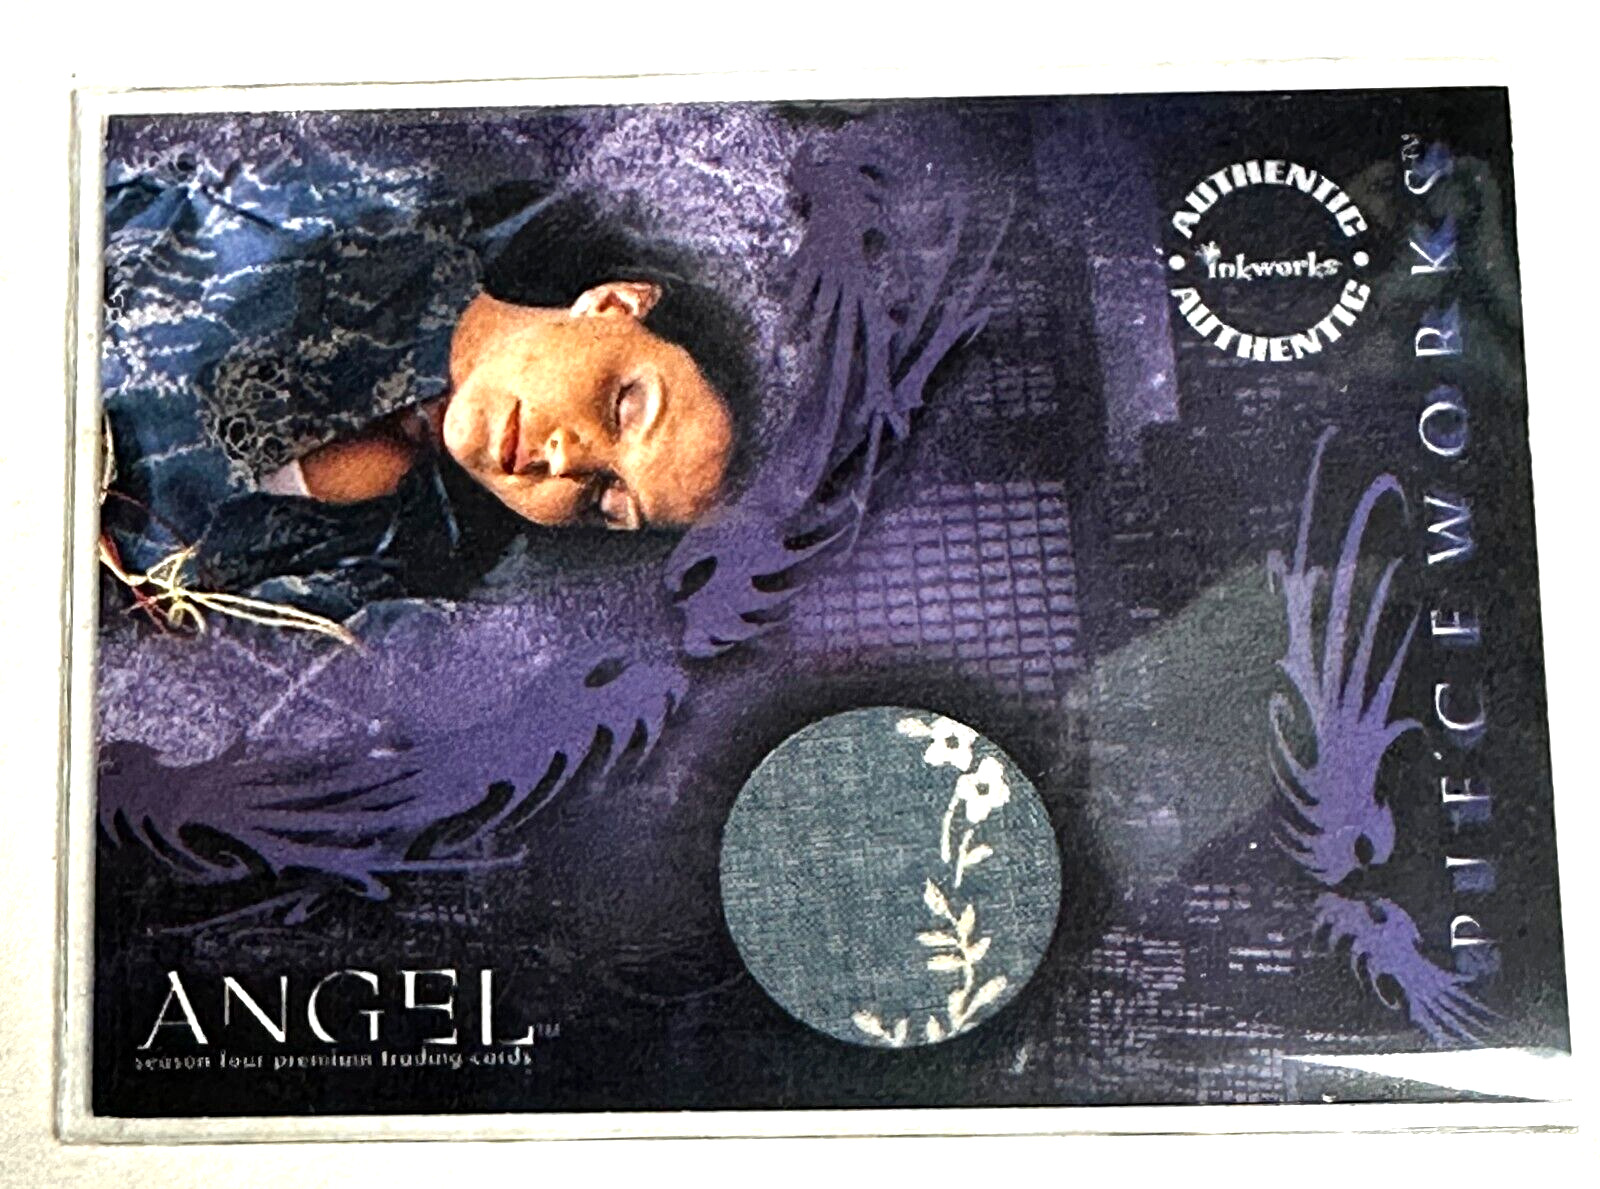 2003 Angel Season 4 Costume Card Featuring Material Worn by Charisma Carpenter